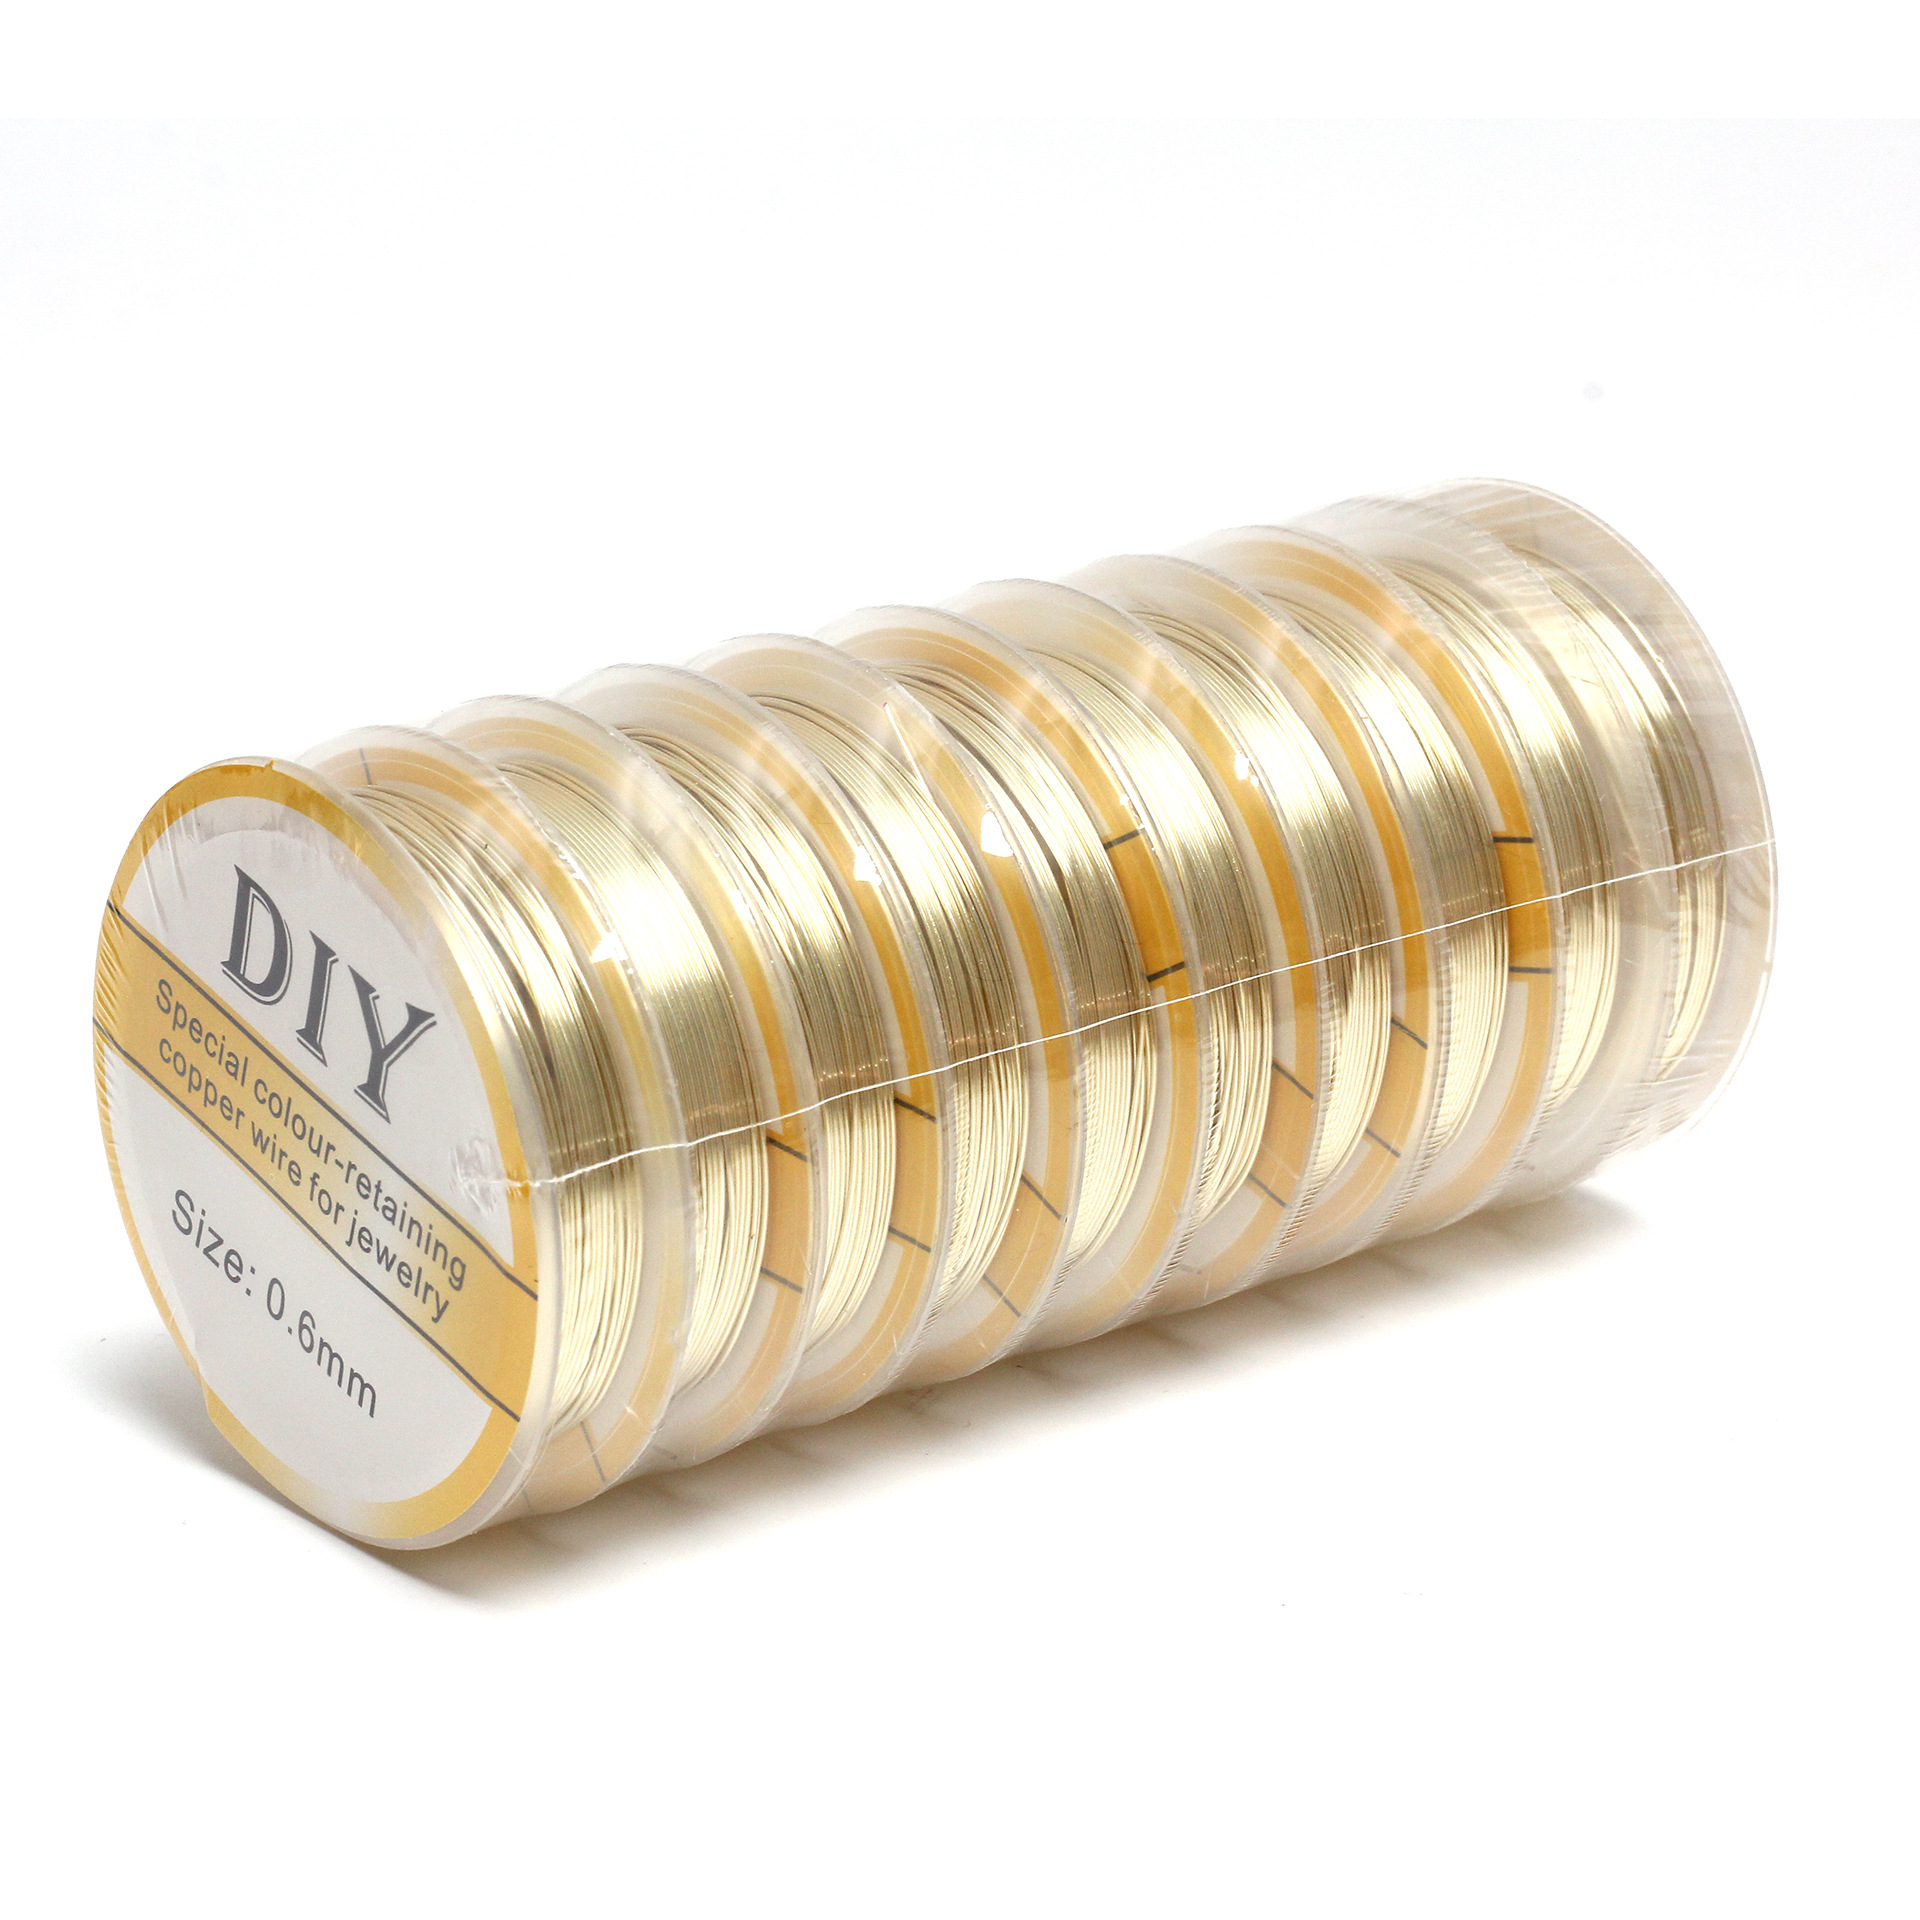 Light Gold 0.5mm copper wire one 6.5m